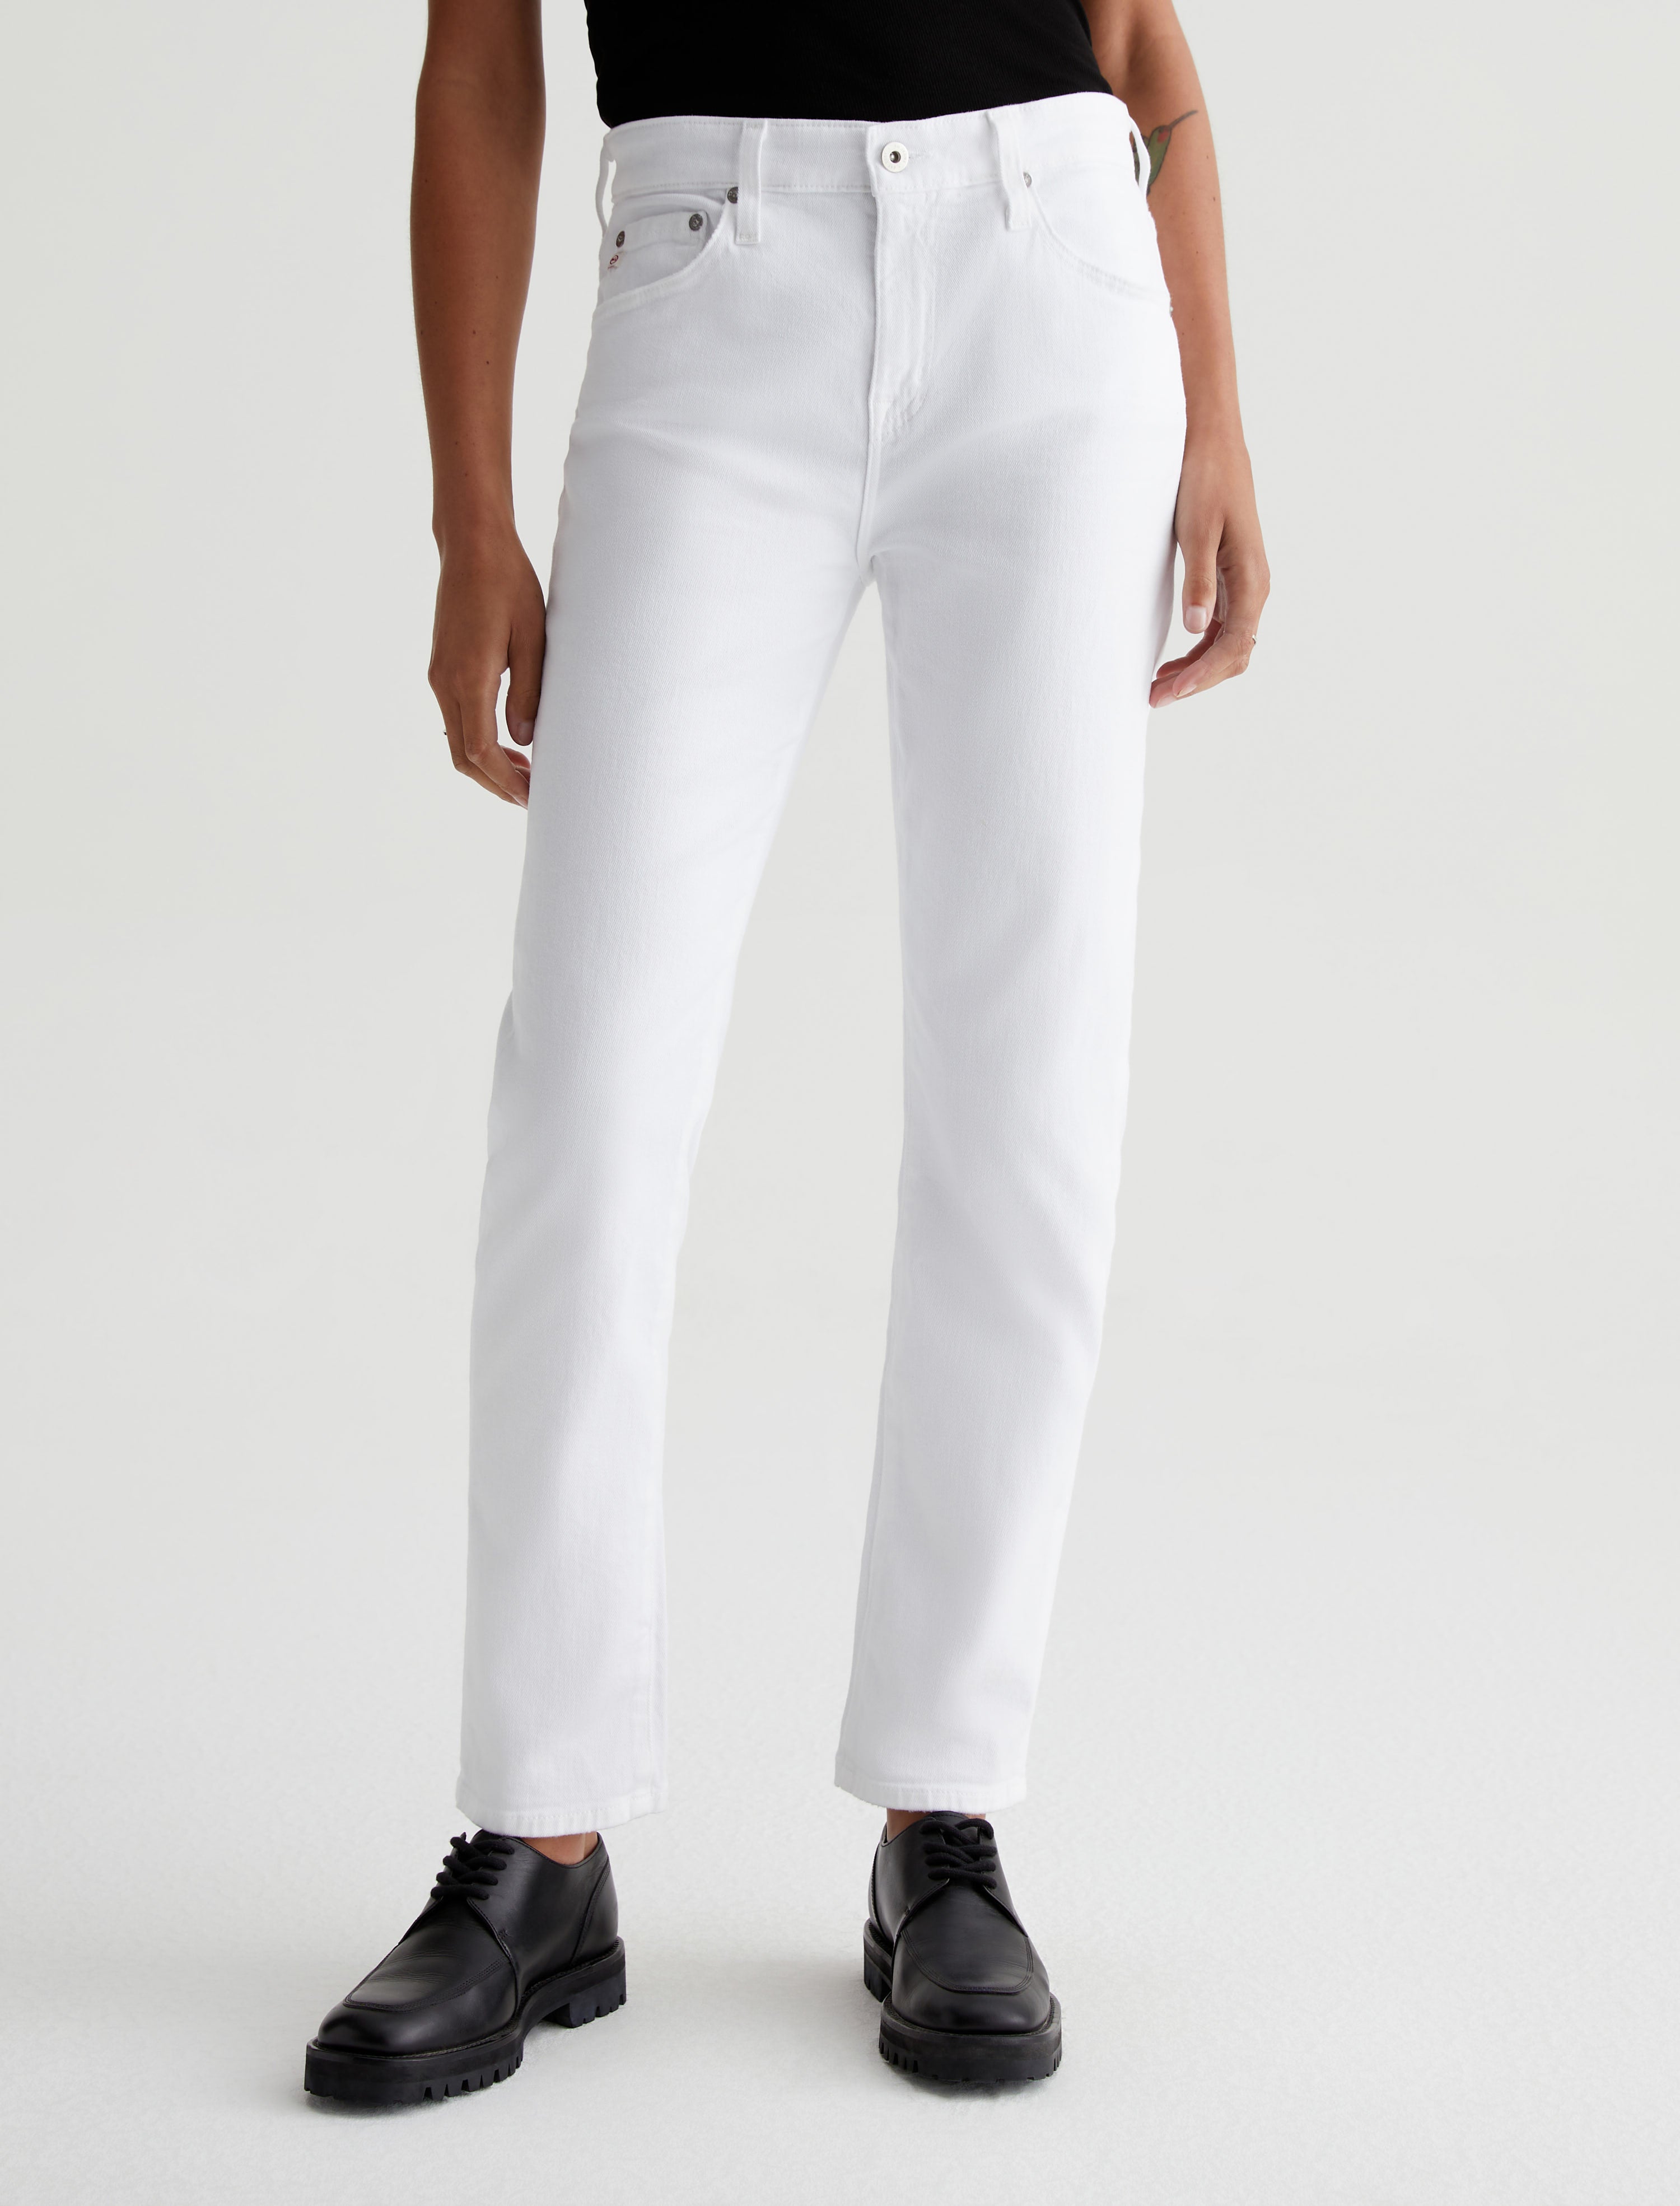 Womens Ex-Boyfriend Slim 1 Year Classic White at AG Jeans Official